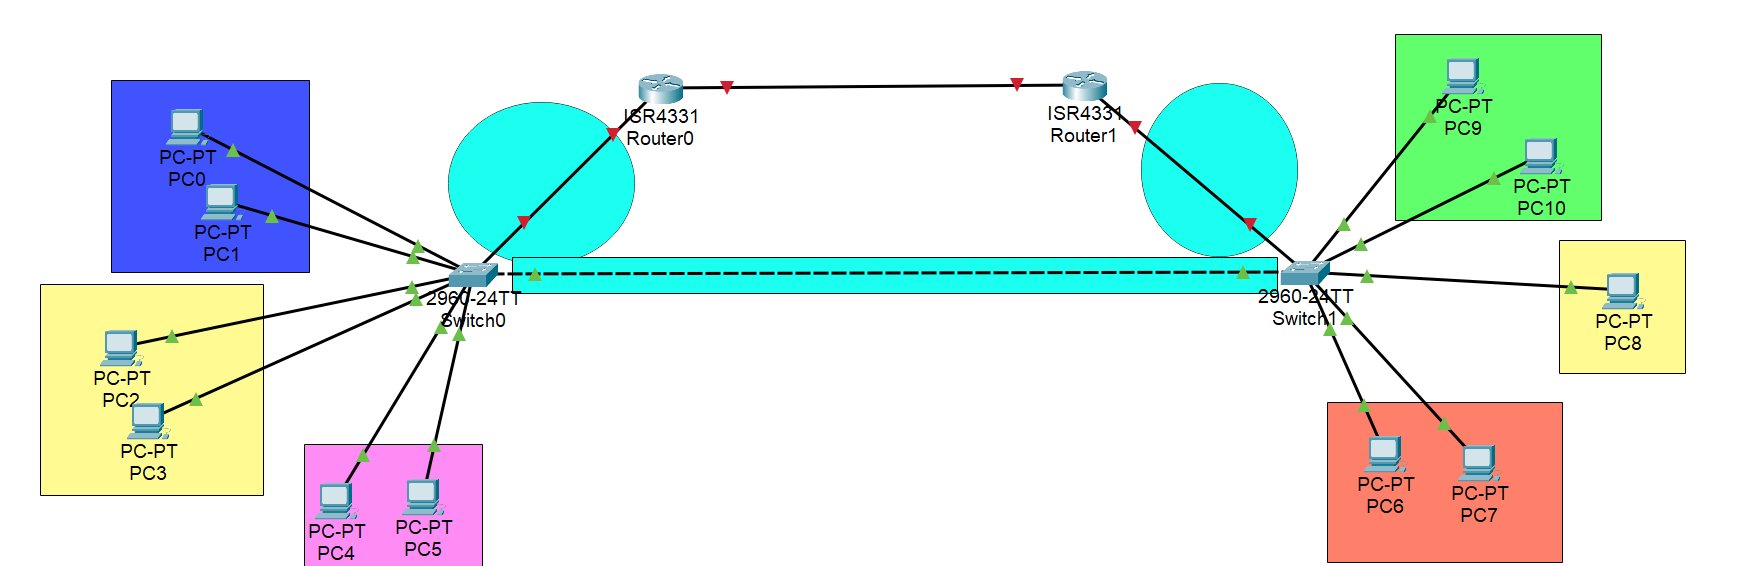 Solved CSIS 3723 Project Using Packet tracer, you will